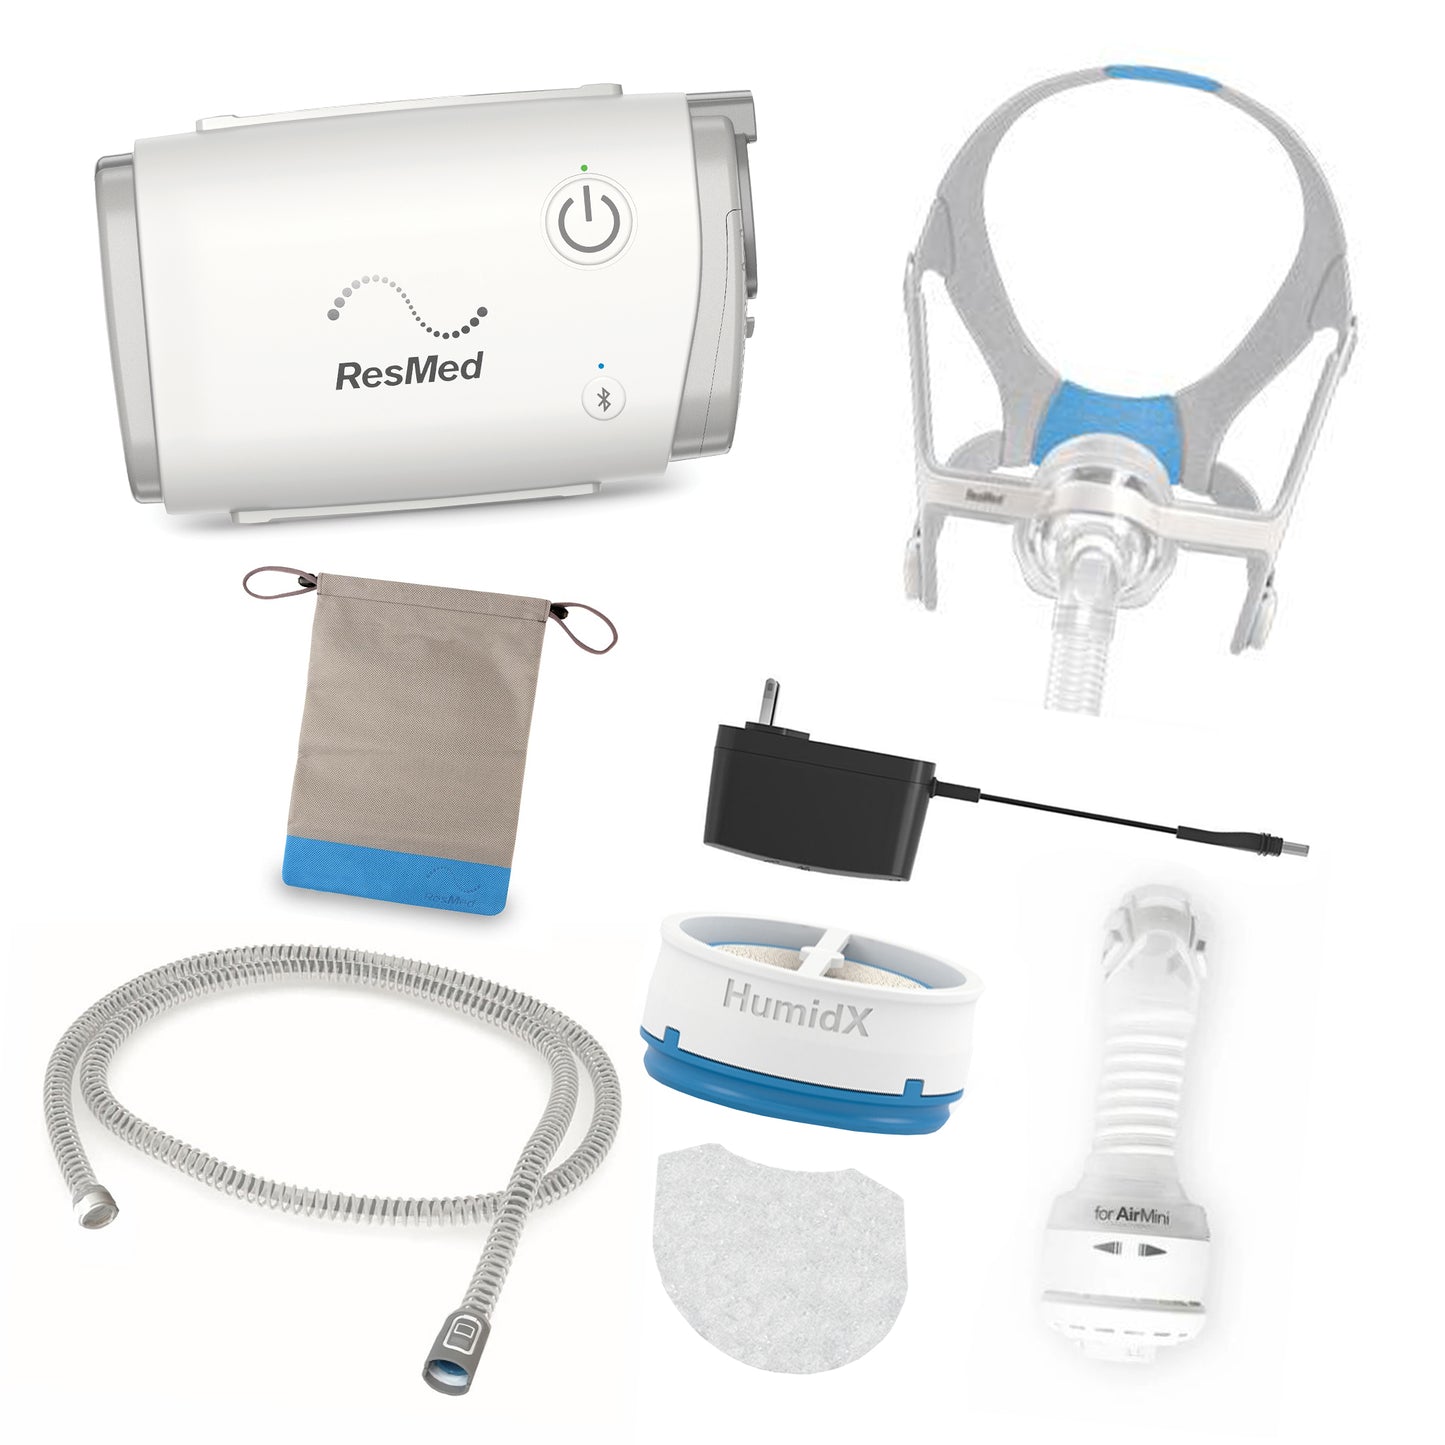 AirMini Travel Bundle with AirTouch N20 CPAP Mask